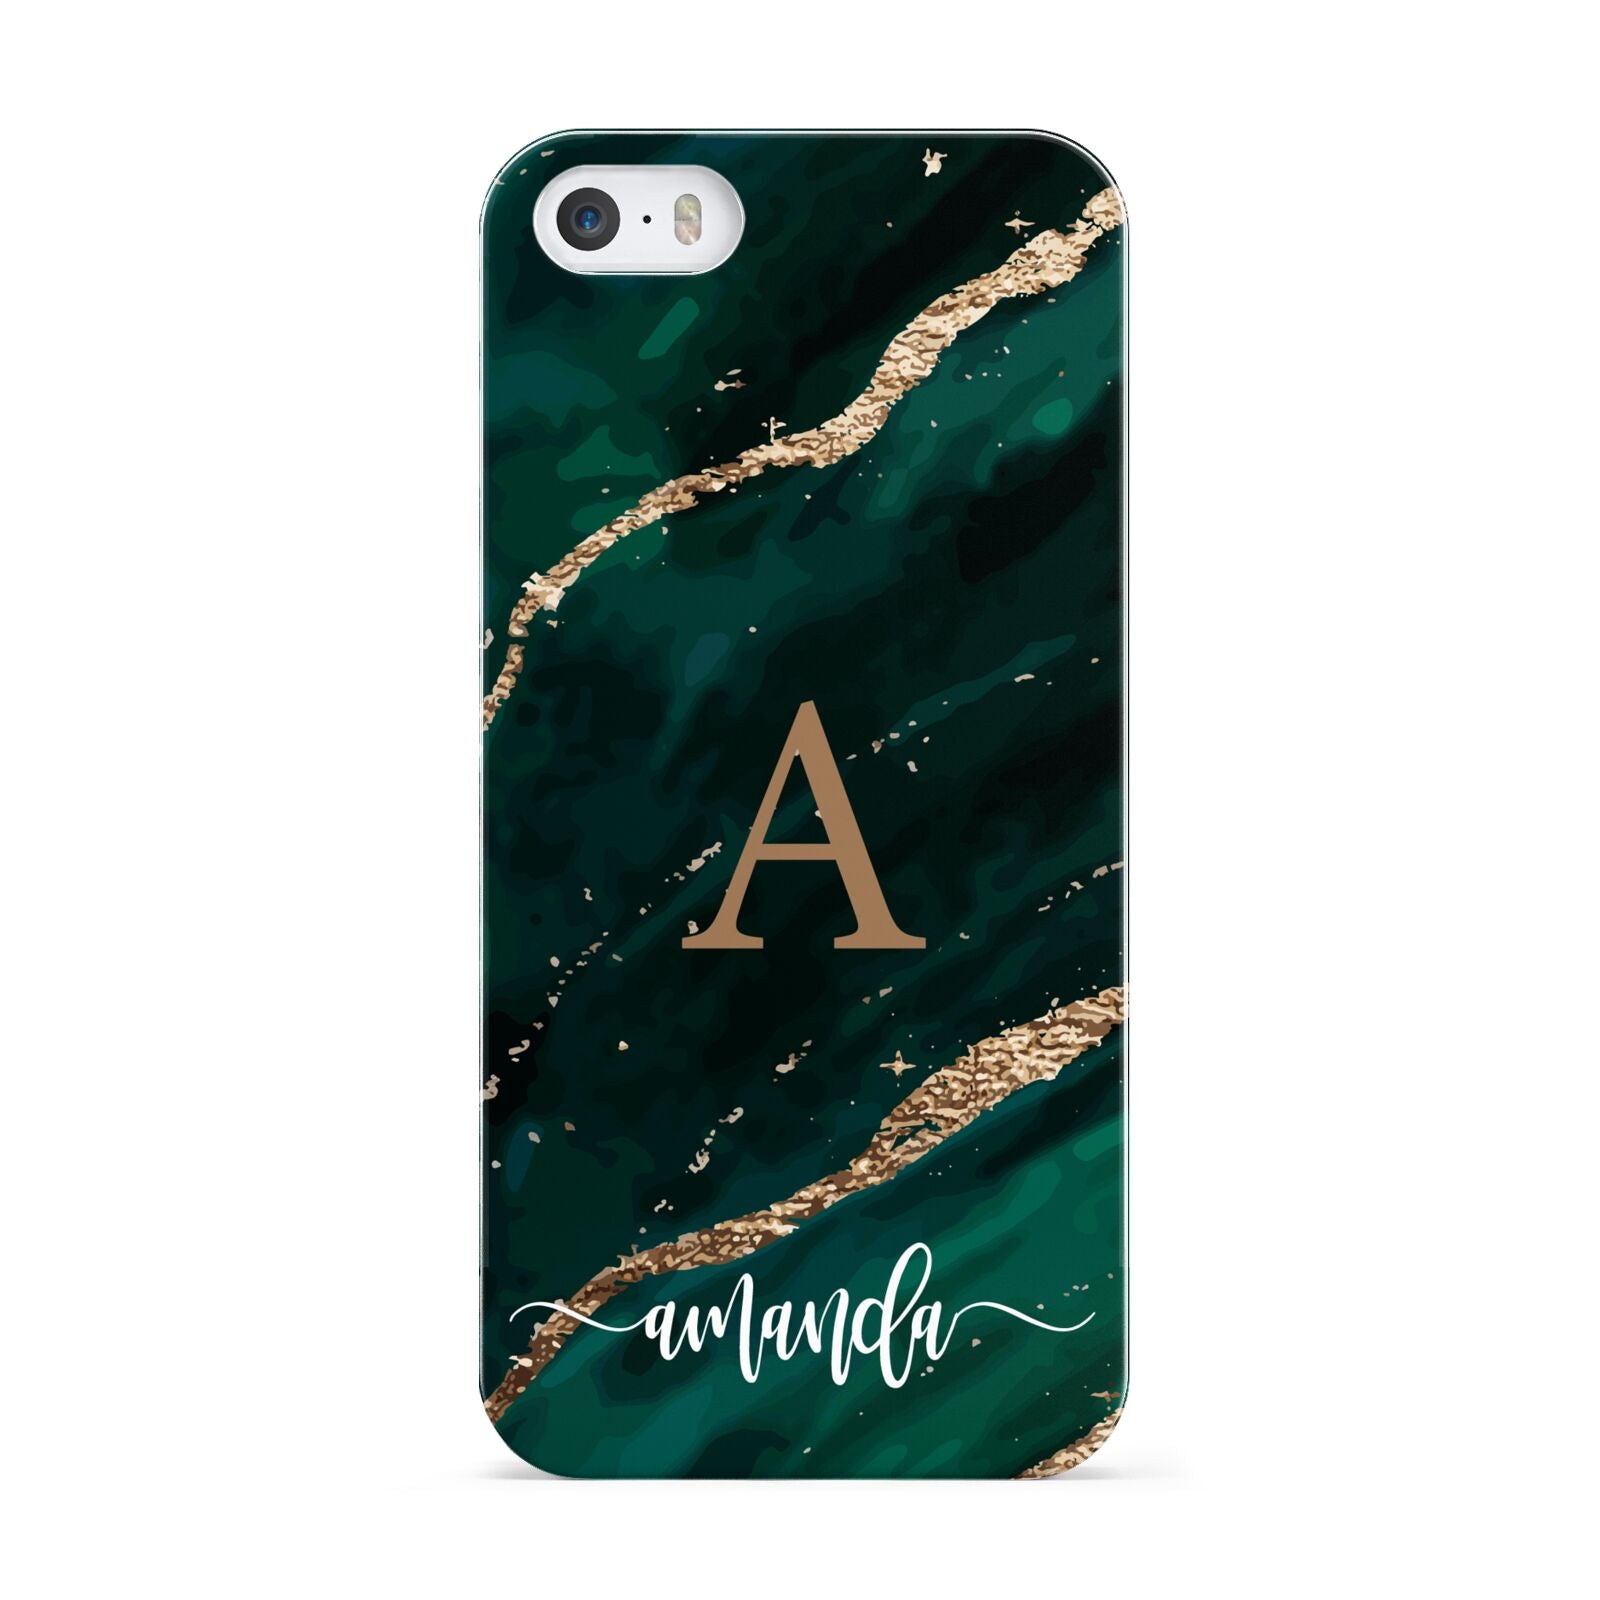 Green Marble Apple iPhone 5 Case